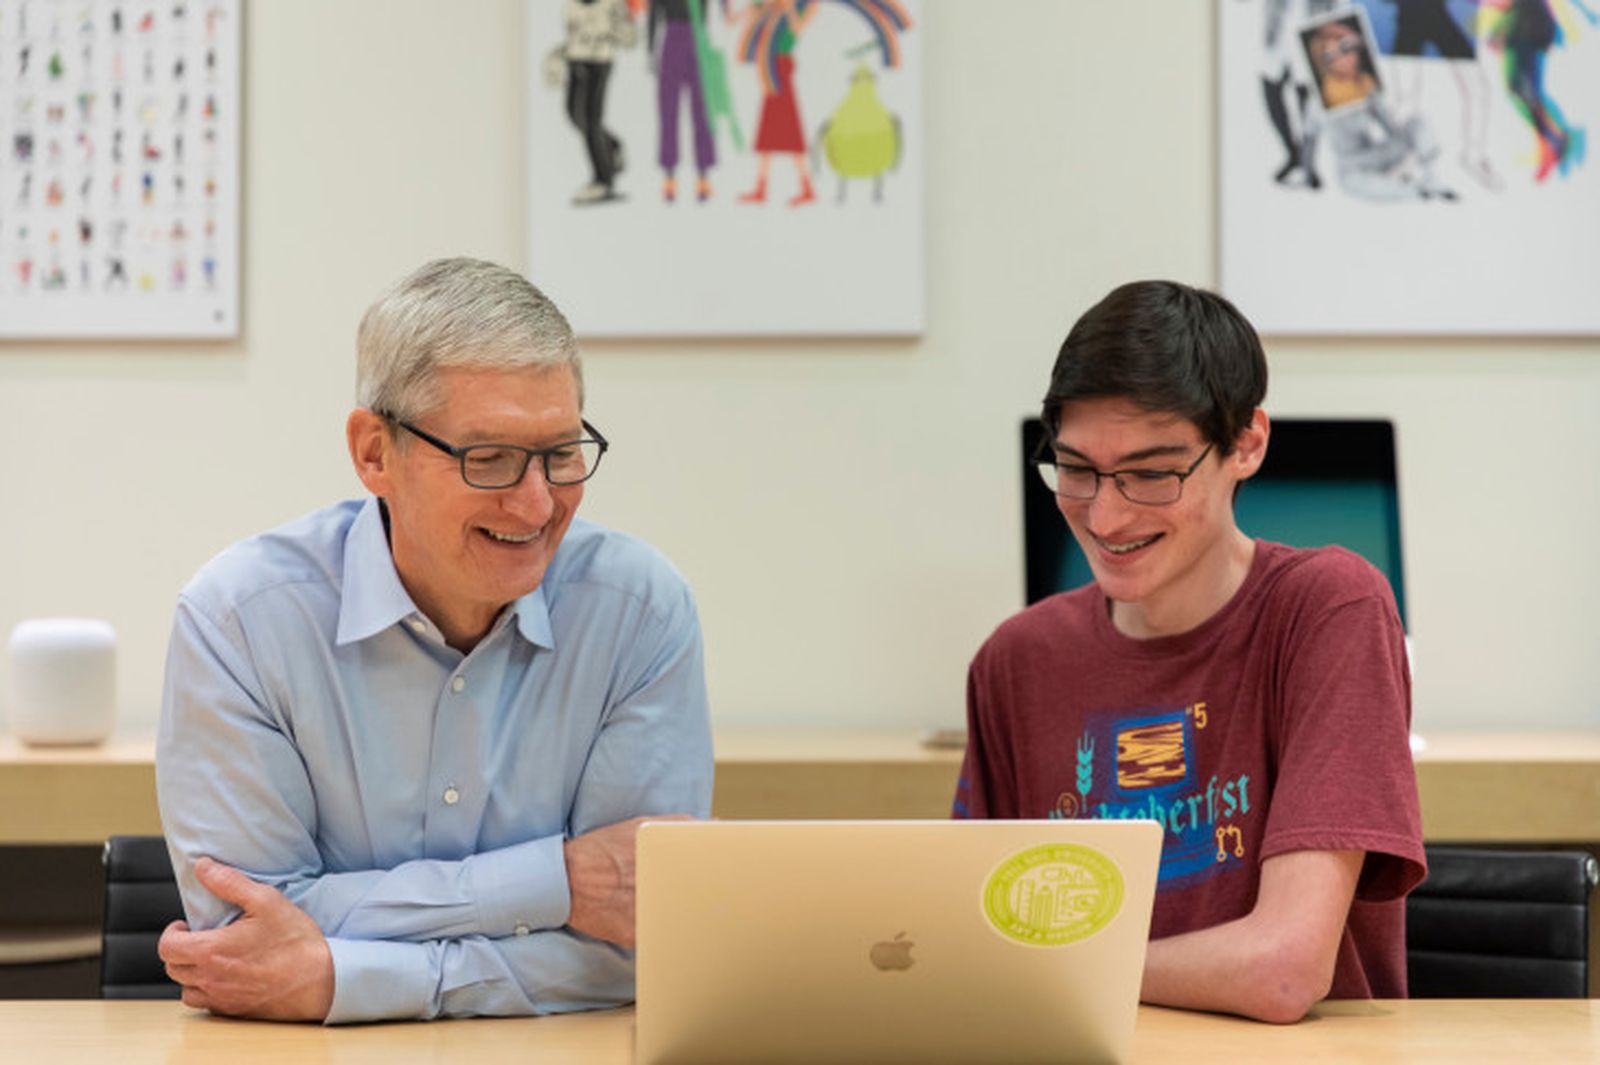 Apple CEO Tim Cook: 'I Don't Think a Four-Year Degree is Necessary to Be Proficient at Coding'